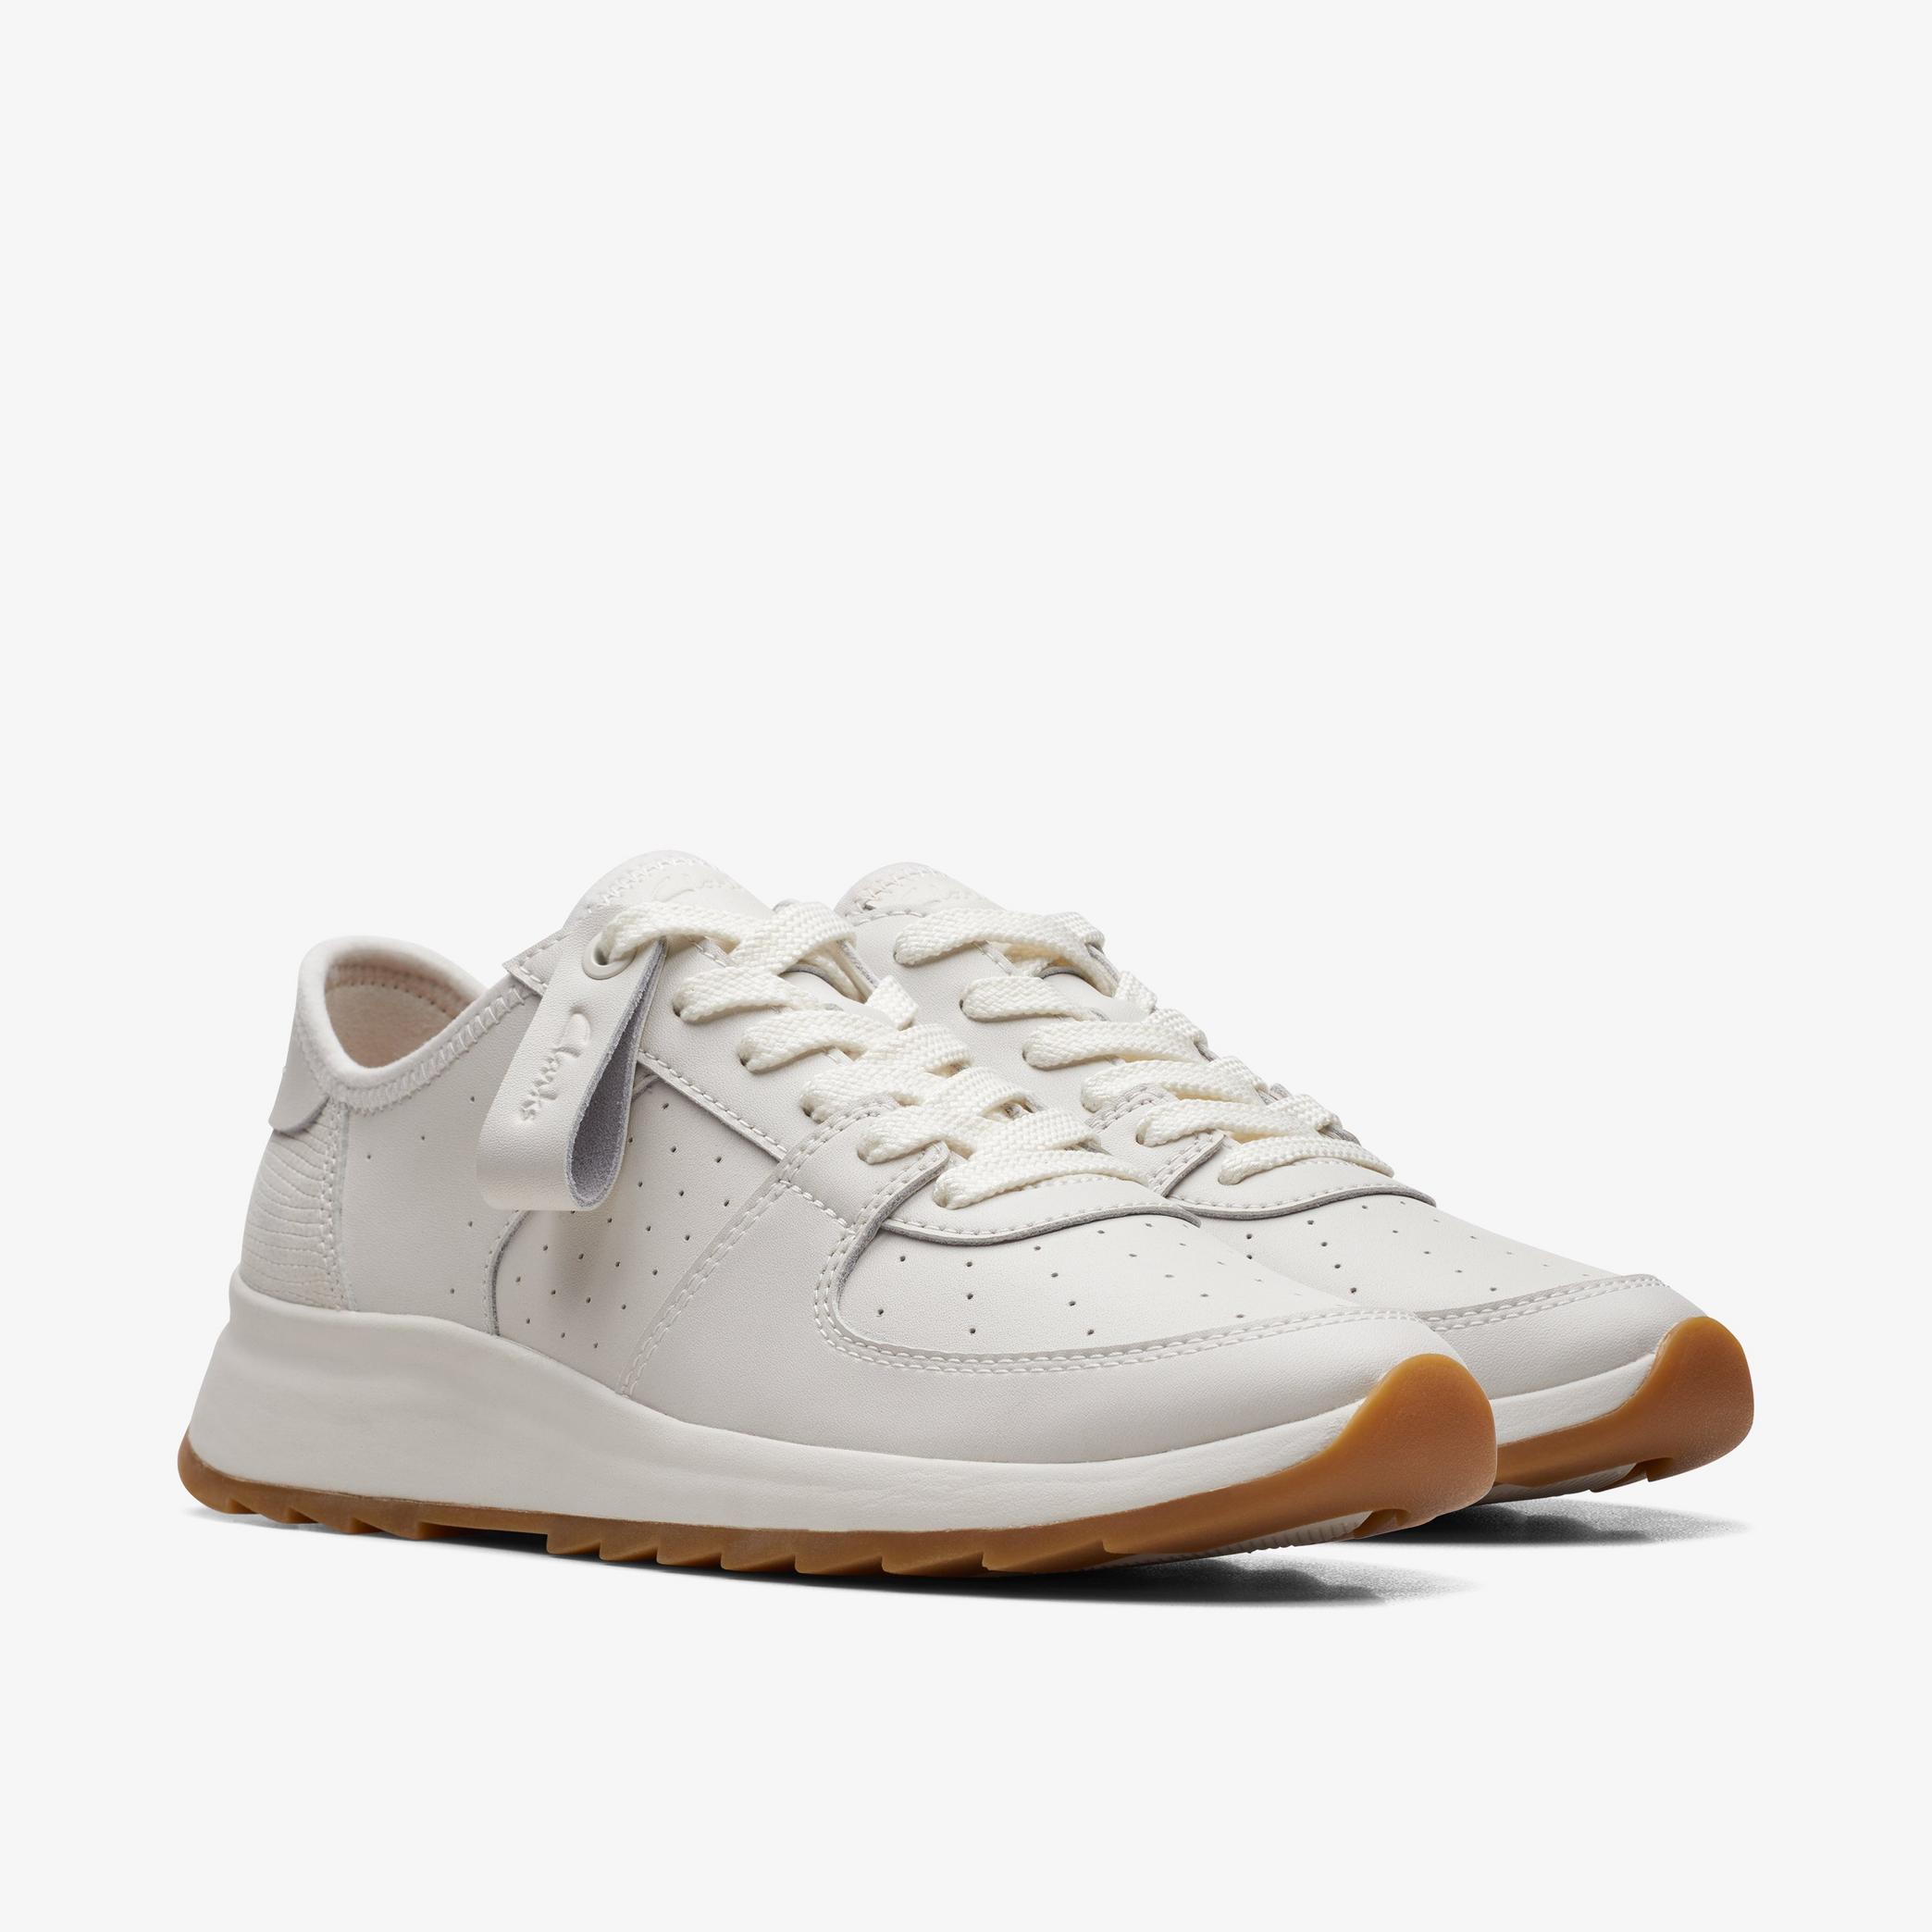 Dash Lite Run Off White Leather Trainers, view 4 of 6